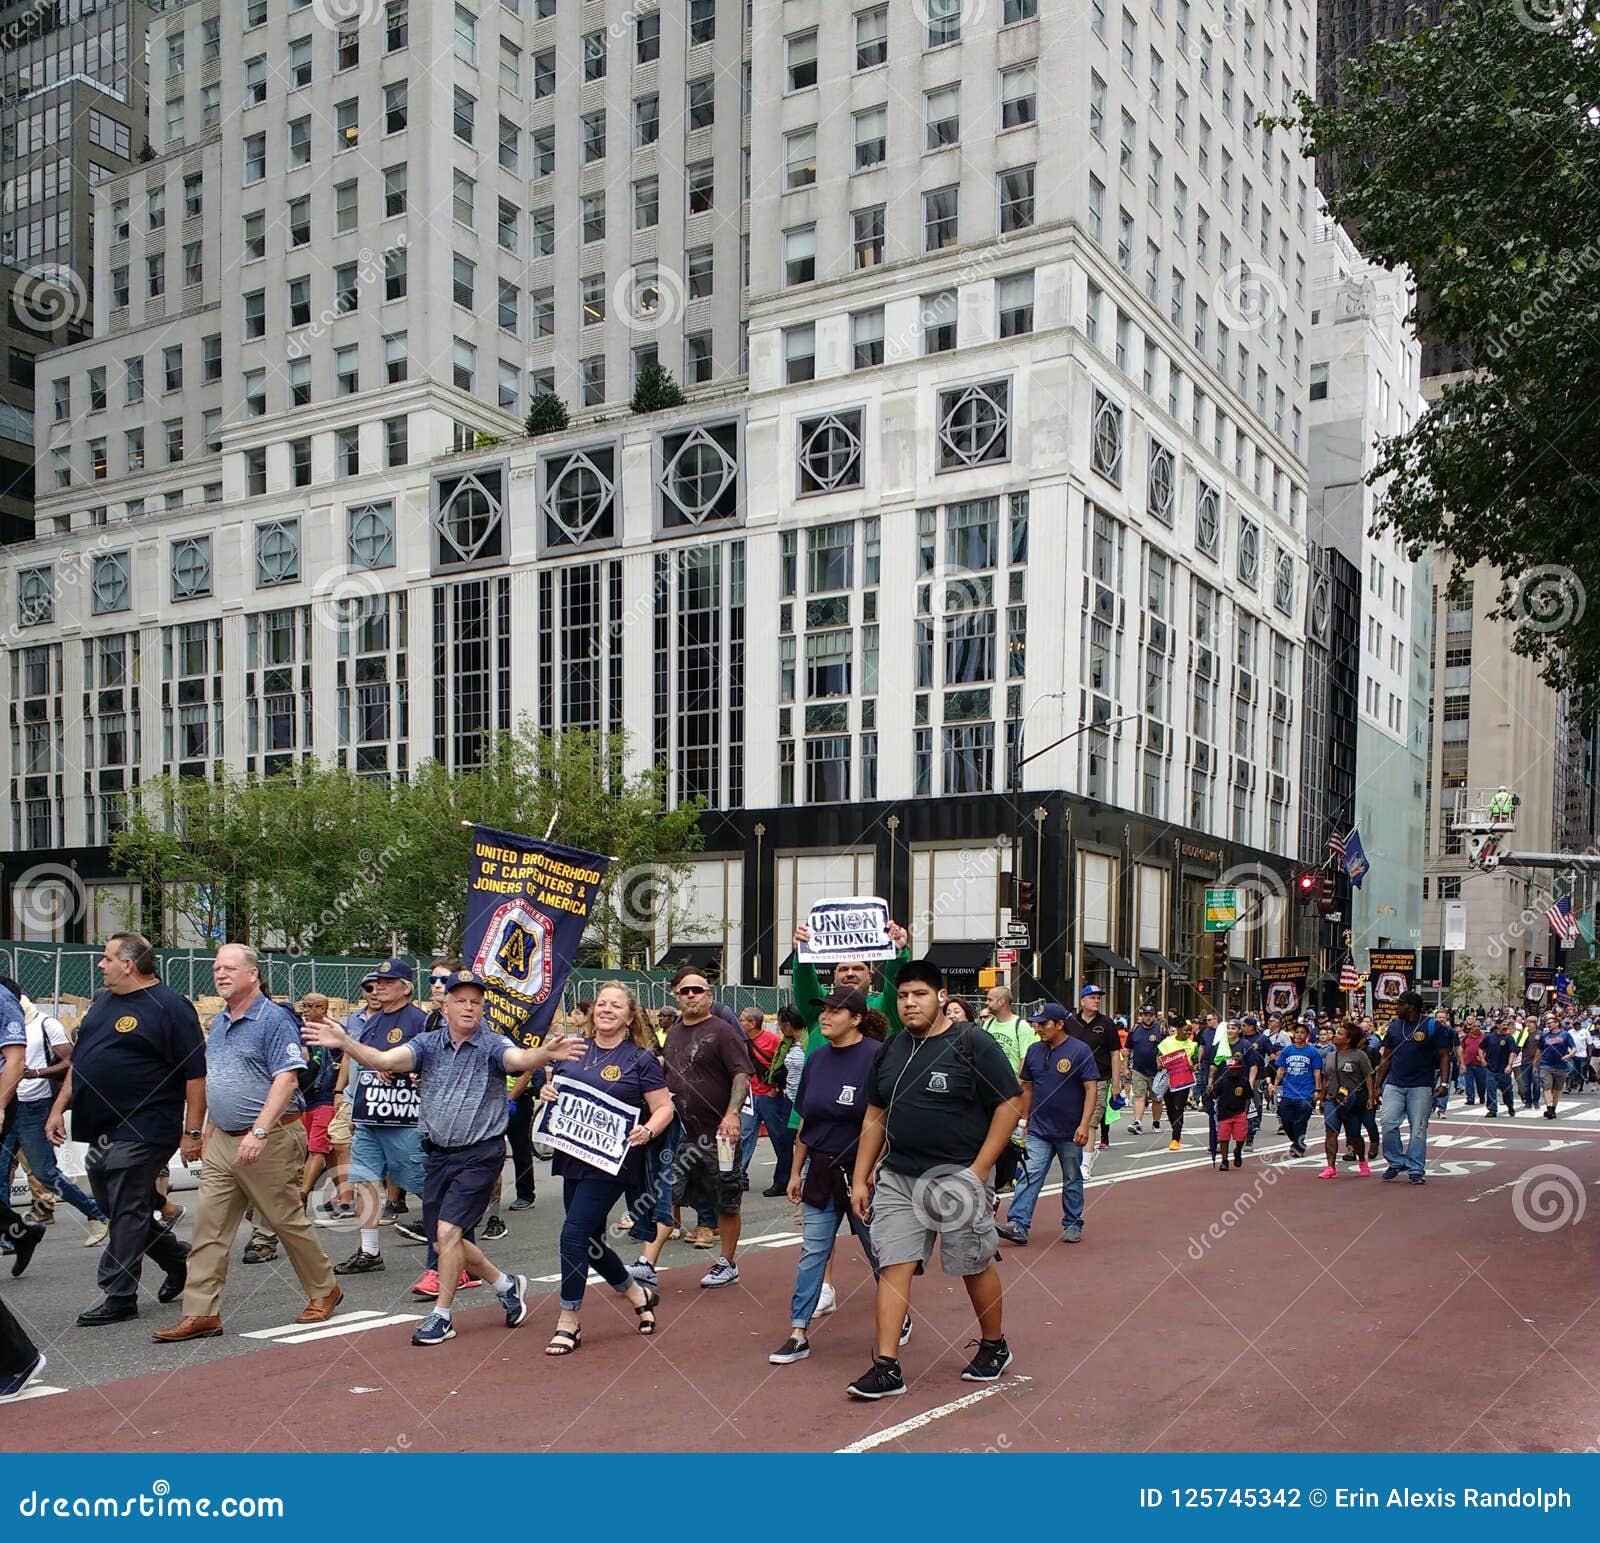 Top 97+ Images where is the labor day parade in nyc Sharp